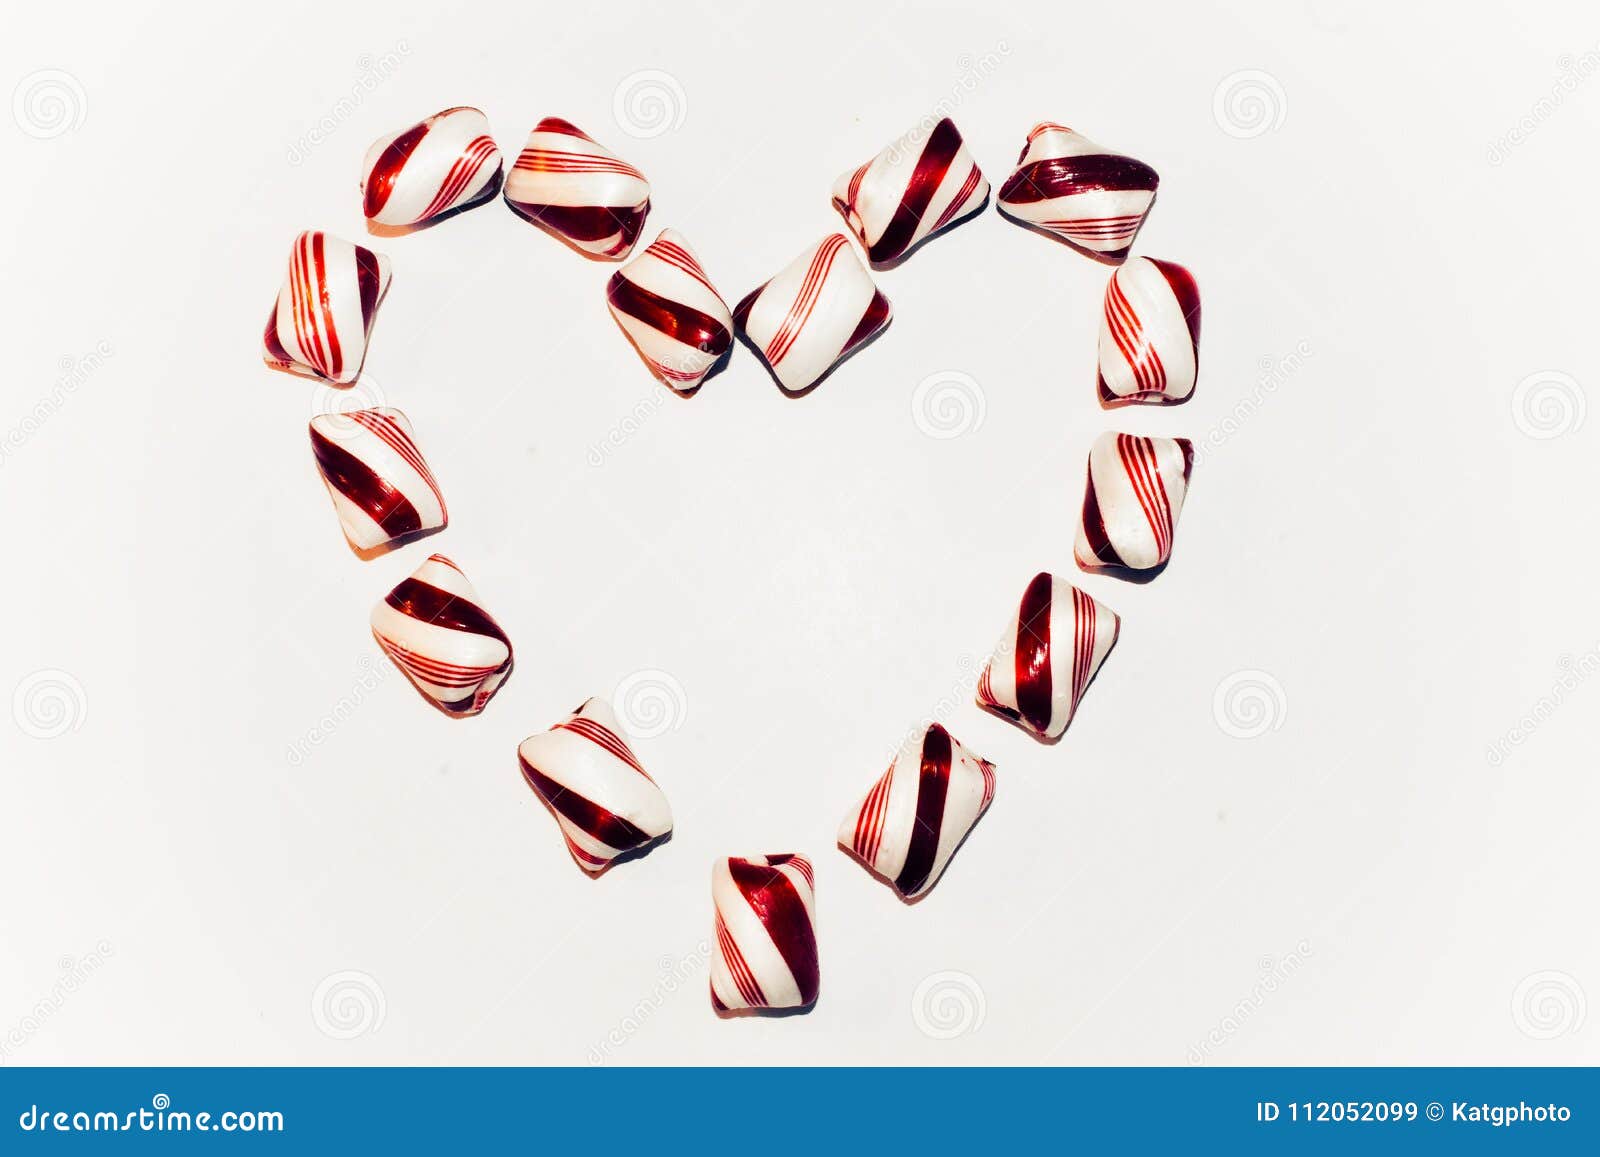 Heart Made of Peppermint Candies on a White Background Stock Image ...